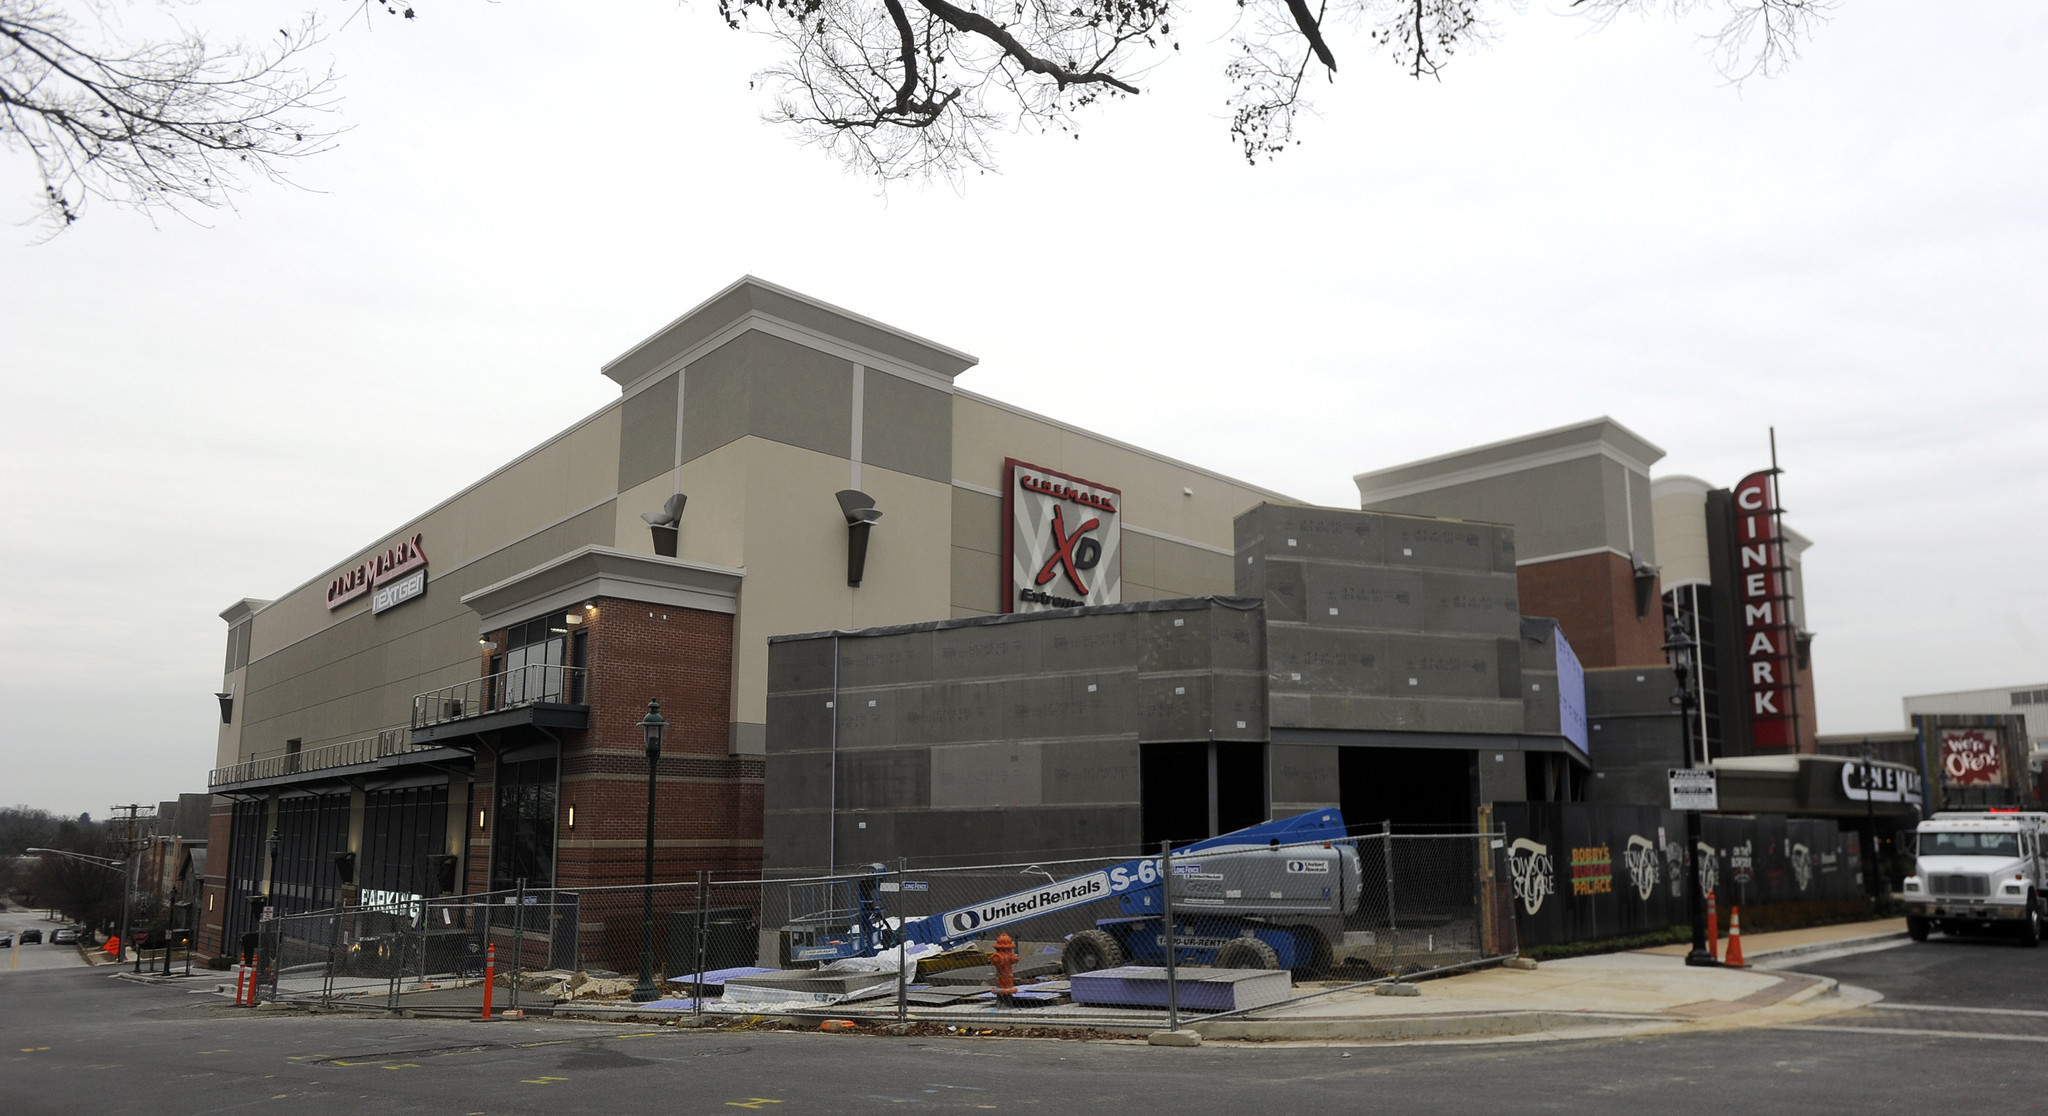 Impact of adding another fitness center to towson university